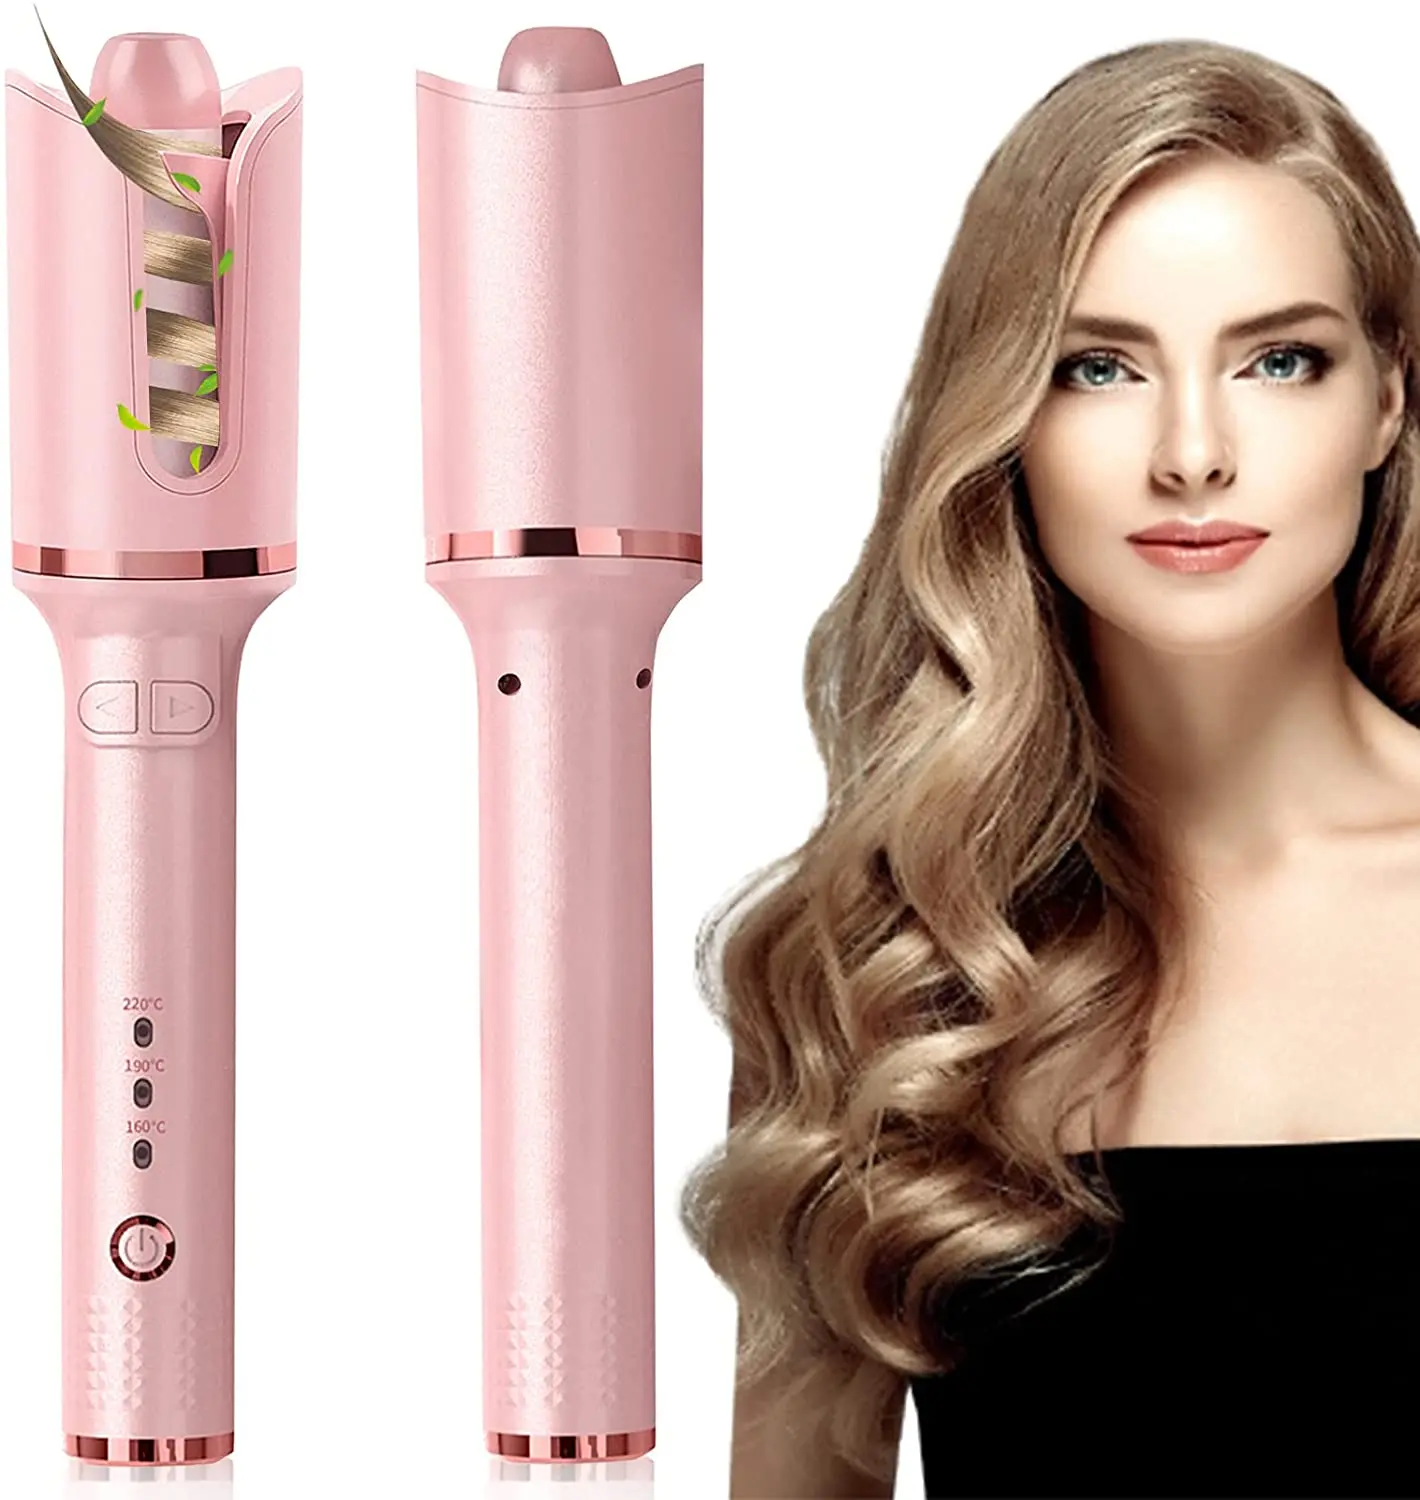 Automatic Hair Curler Curling Iron Professional Rotating Ceramic Magic Hair Curlers Styling Tools